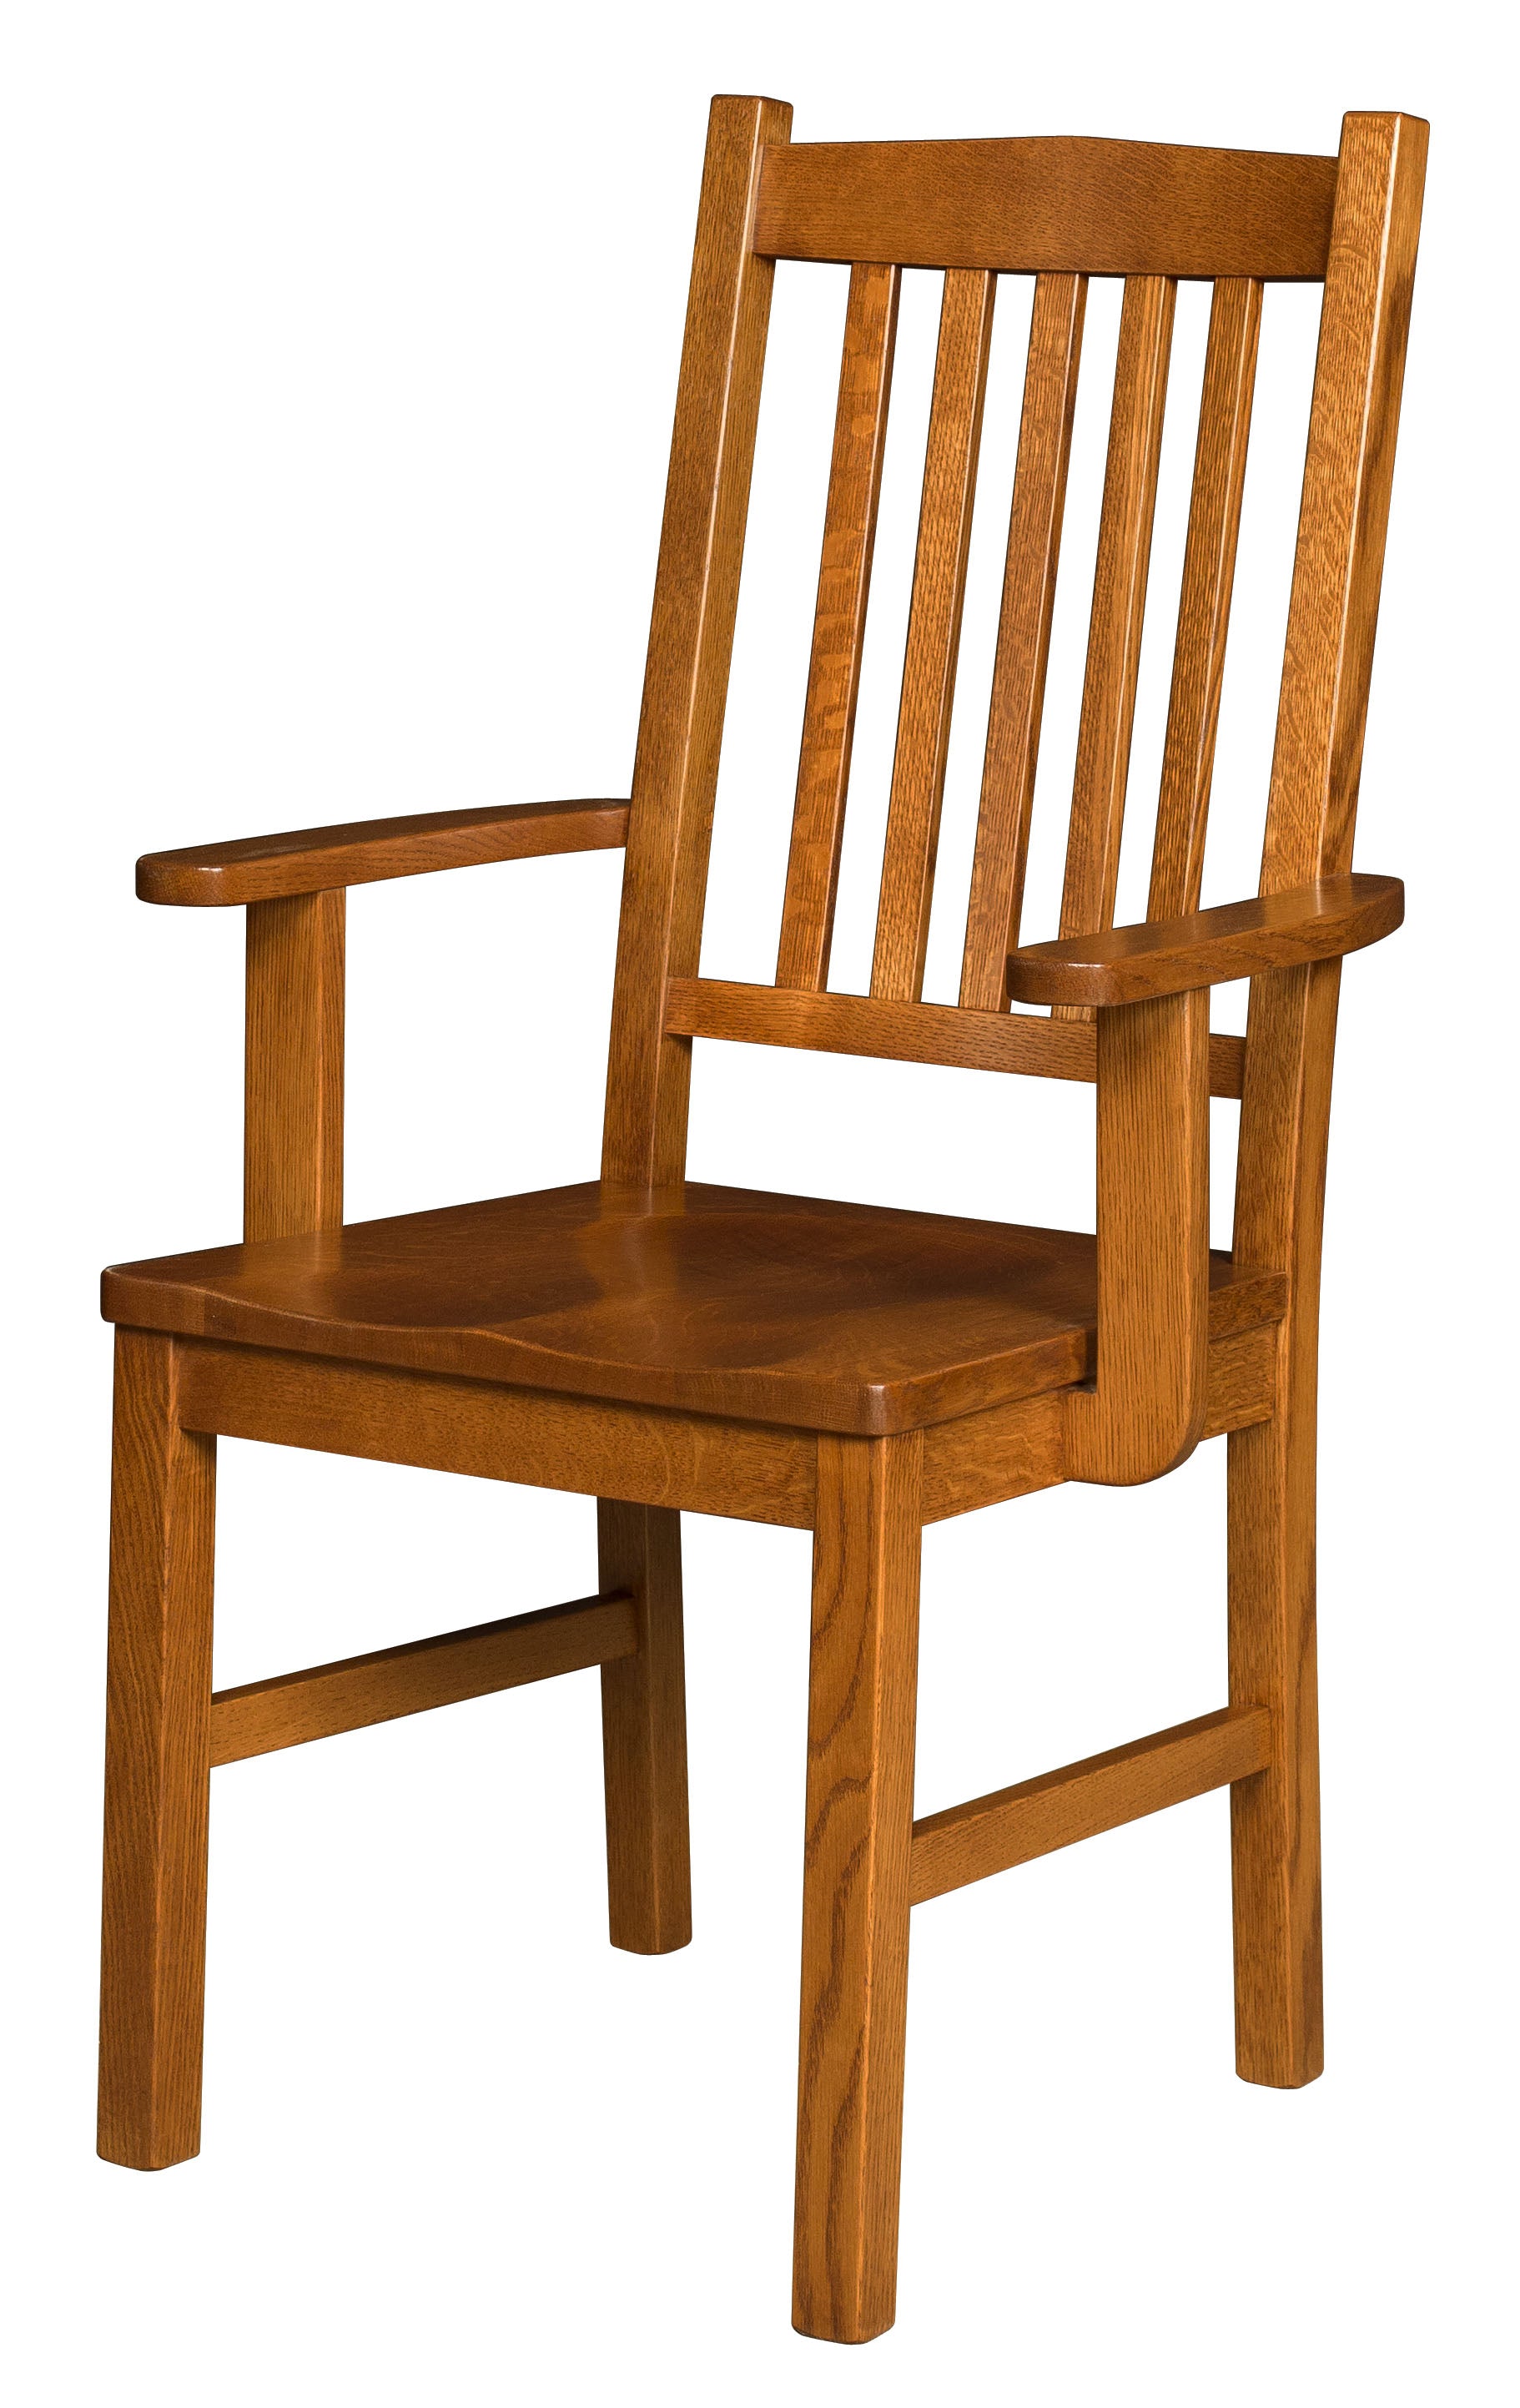 Amish Mission Dining Chair